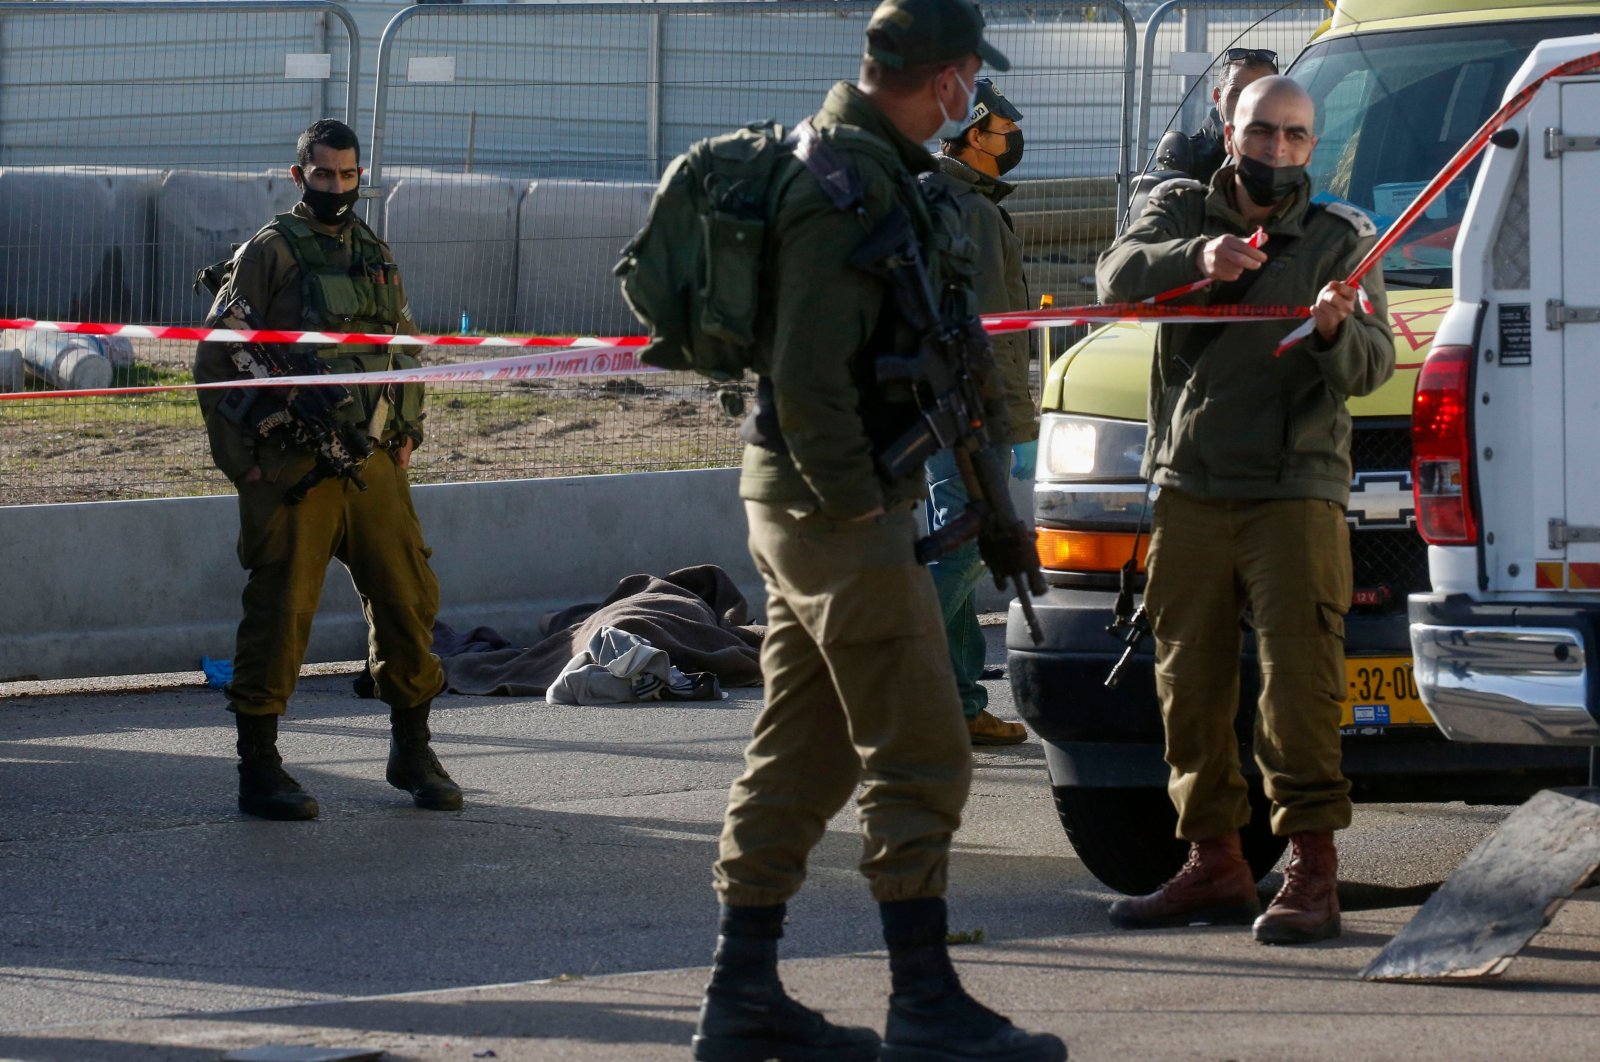 The body of a Palestinian man shot by Israeli security forces lays by the side of the road near Gosh Etzion, north of Hebron city in the occupied West Bank, Jan. 31, 2021. (AFP Photo)